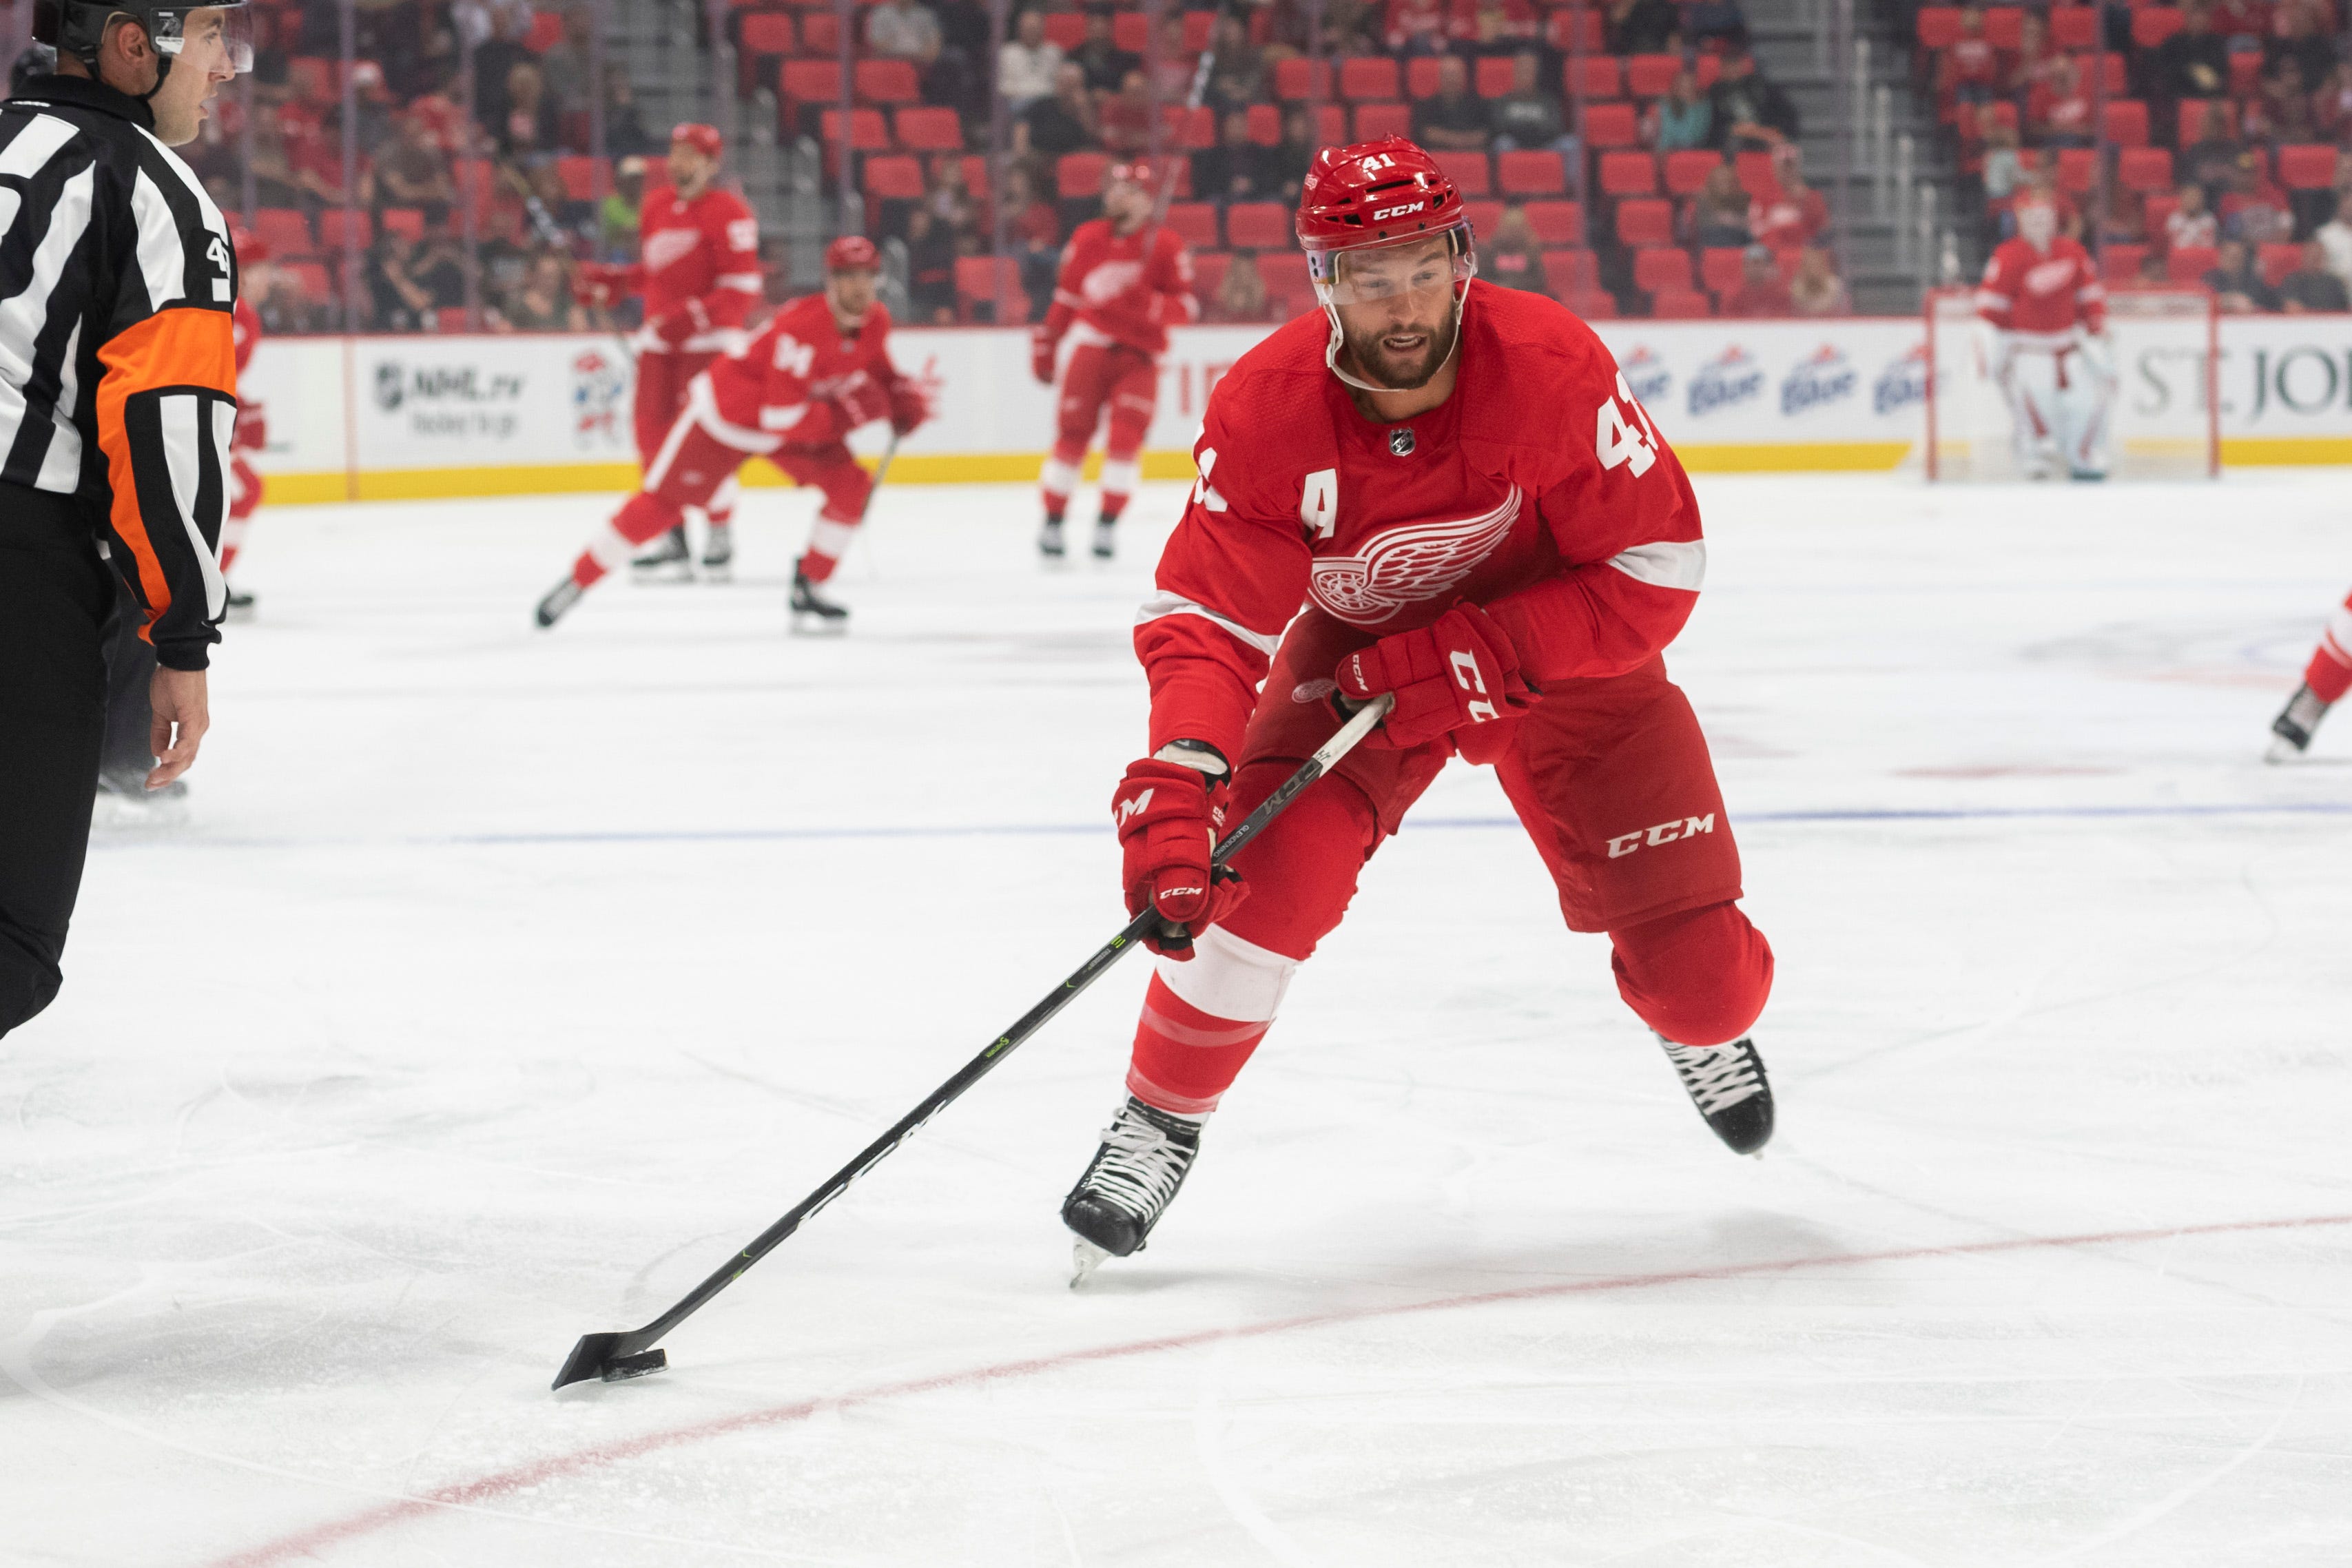 LUKE GLENDENING: AGE: 29. HT: 5-11. WT: 192. STATS: 69 games, 11 goals, 8 assists, 19 points. ANALYSIS: With several similar players on the rise in the organization, Glendening could become a valuable trade piece for contenders looking for a tough, gritty defensive forward.